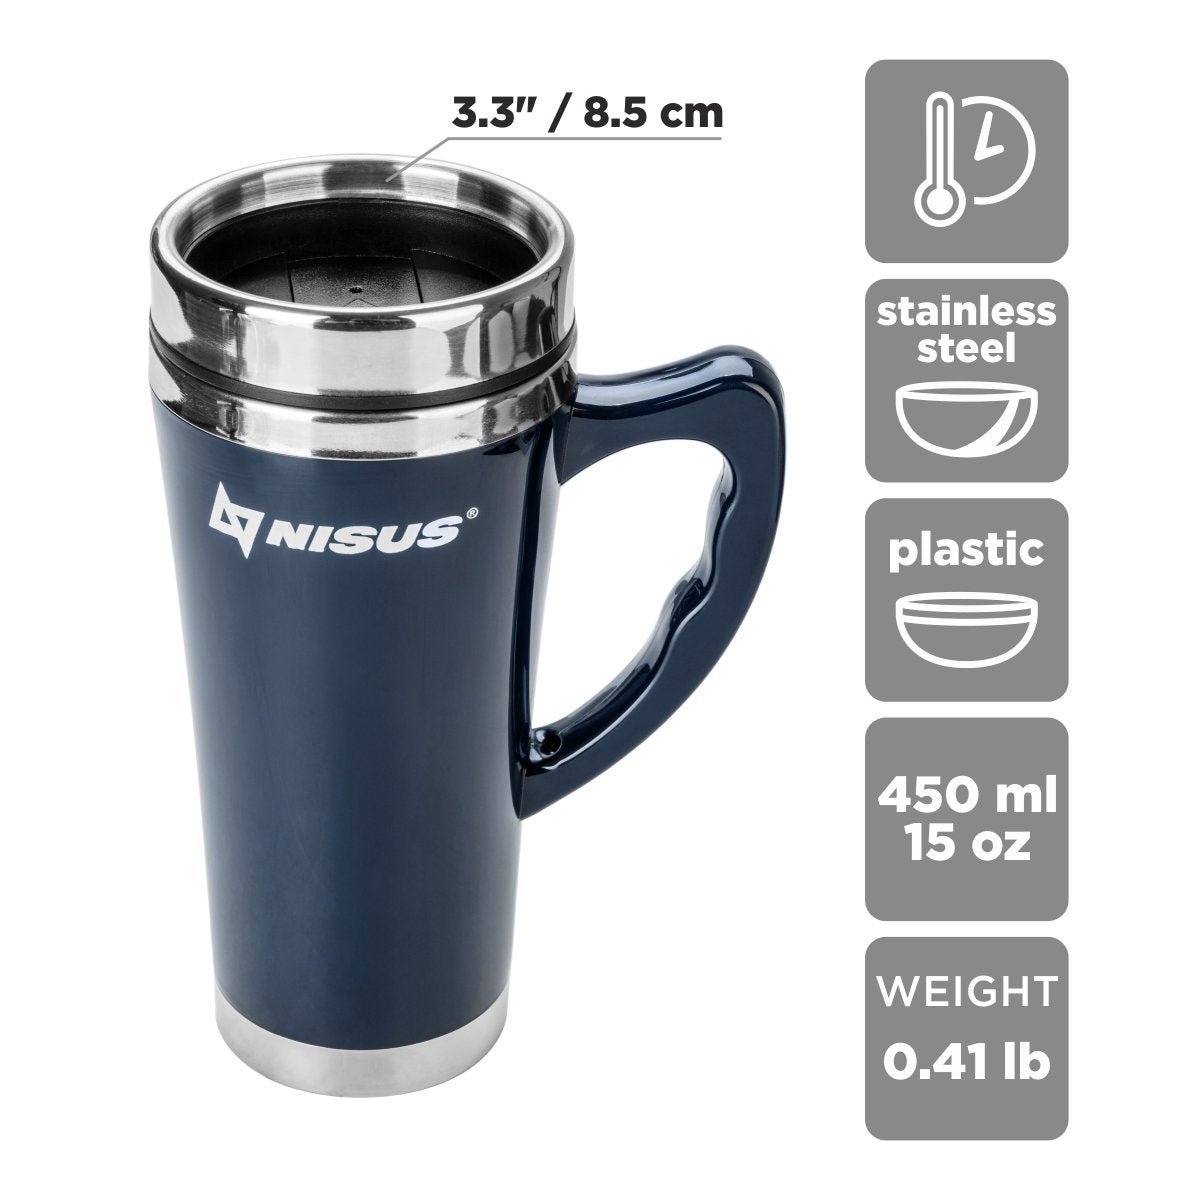 Nisus Stainless Steel Tumbler with Handle and Lid Blue 15 oz